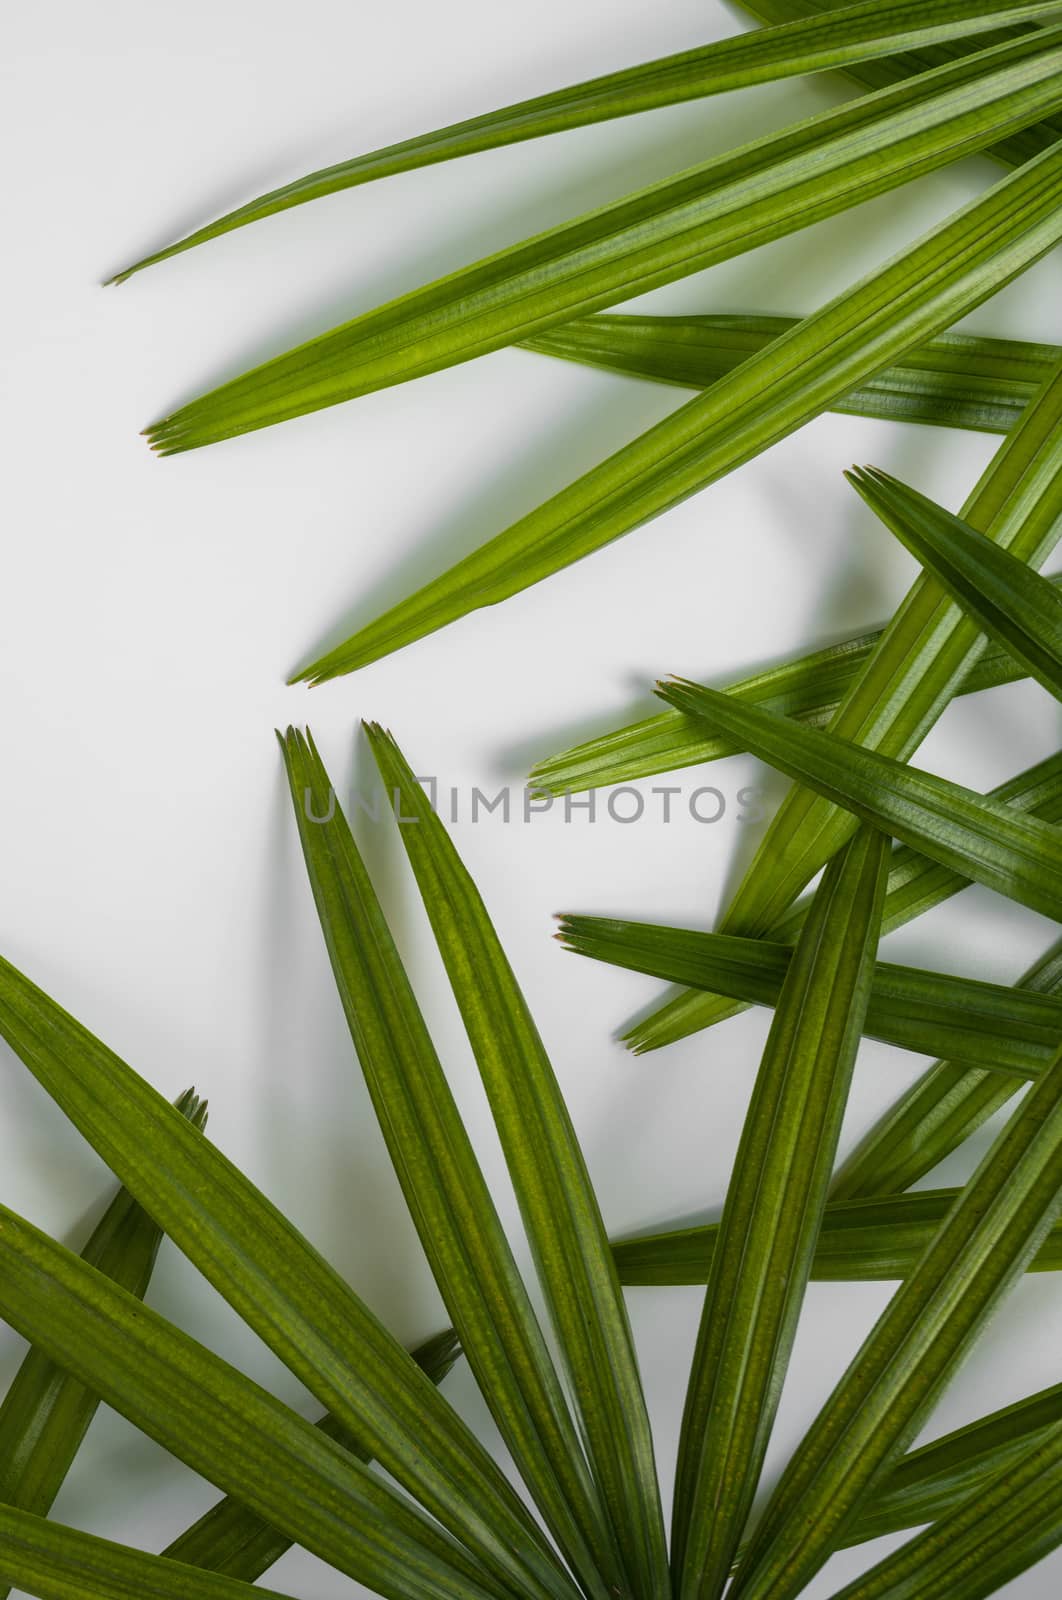 Closeup of green leaf on white wall (Lady palm). Greenery background by chadchai_k